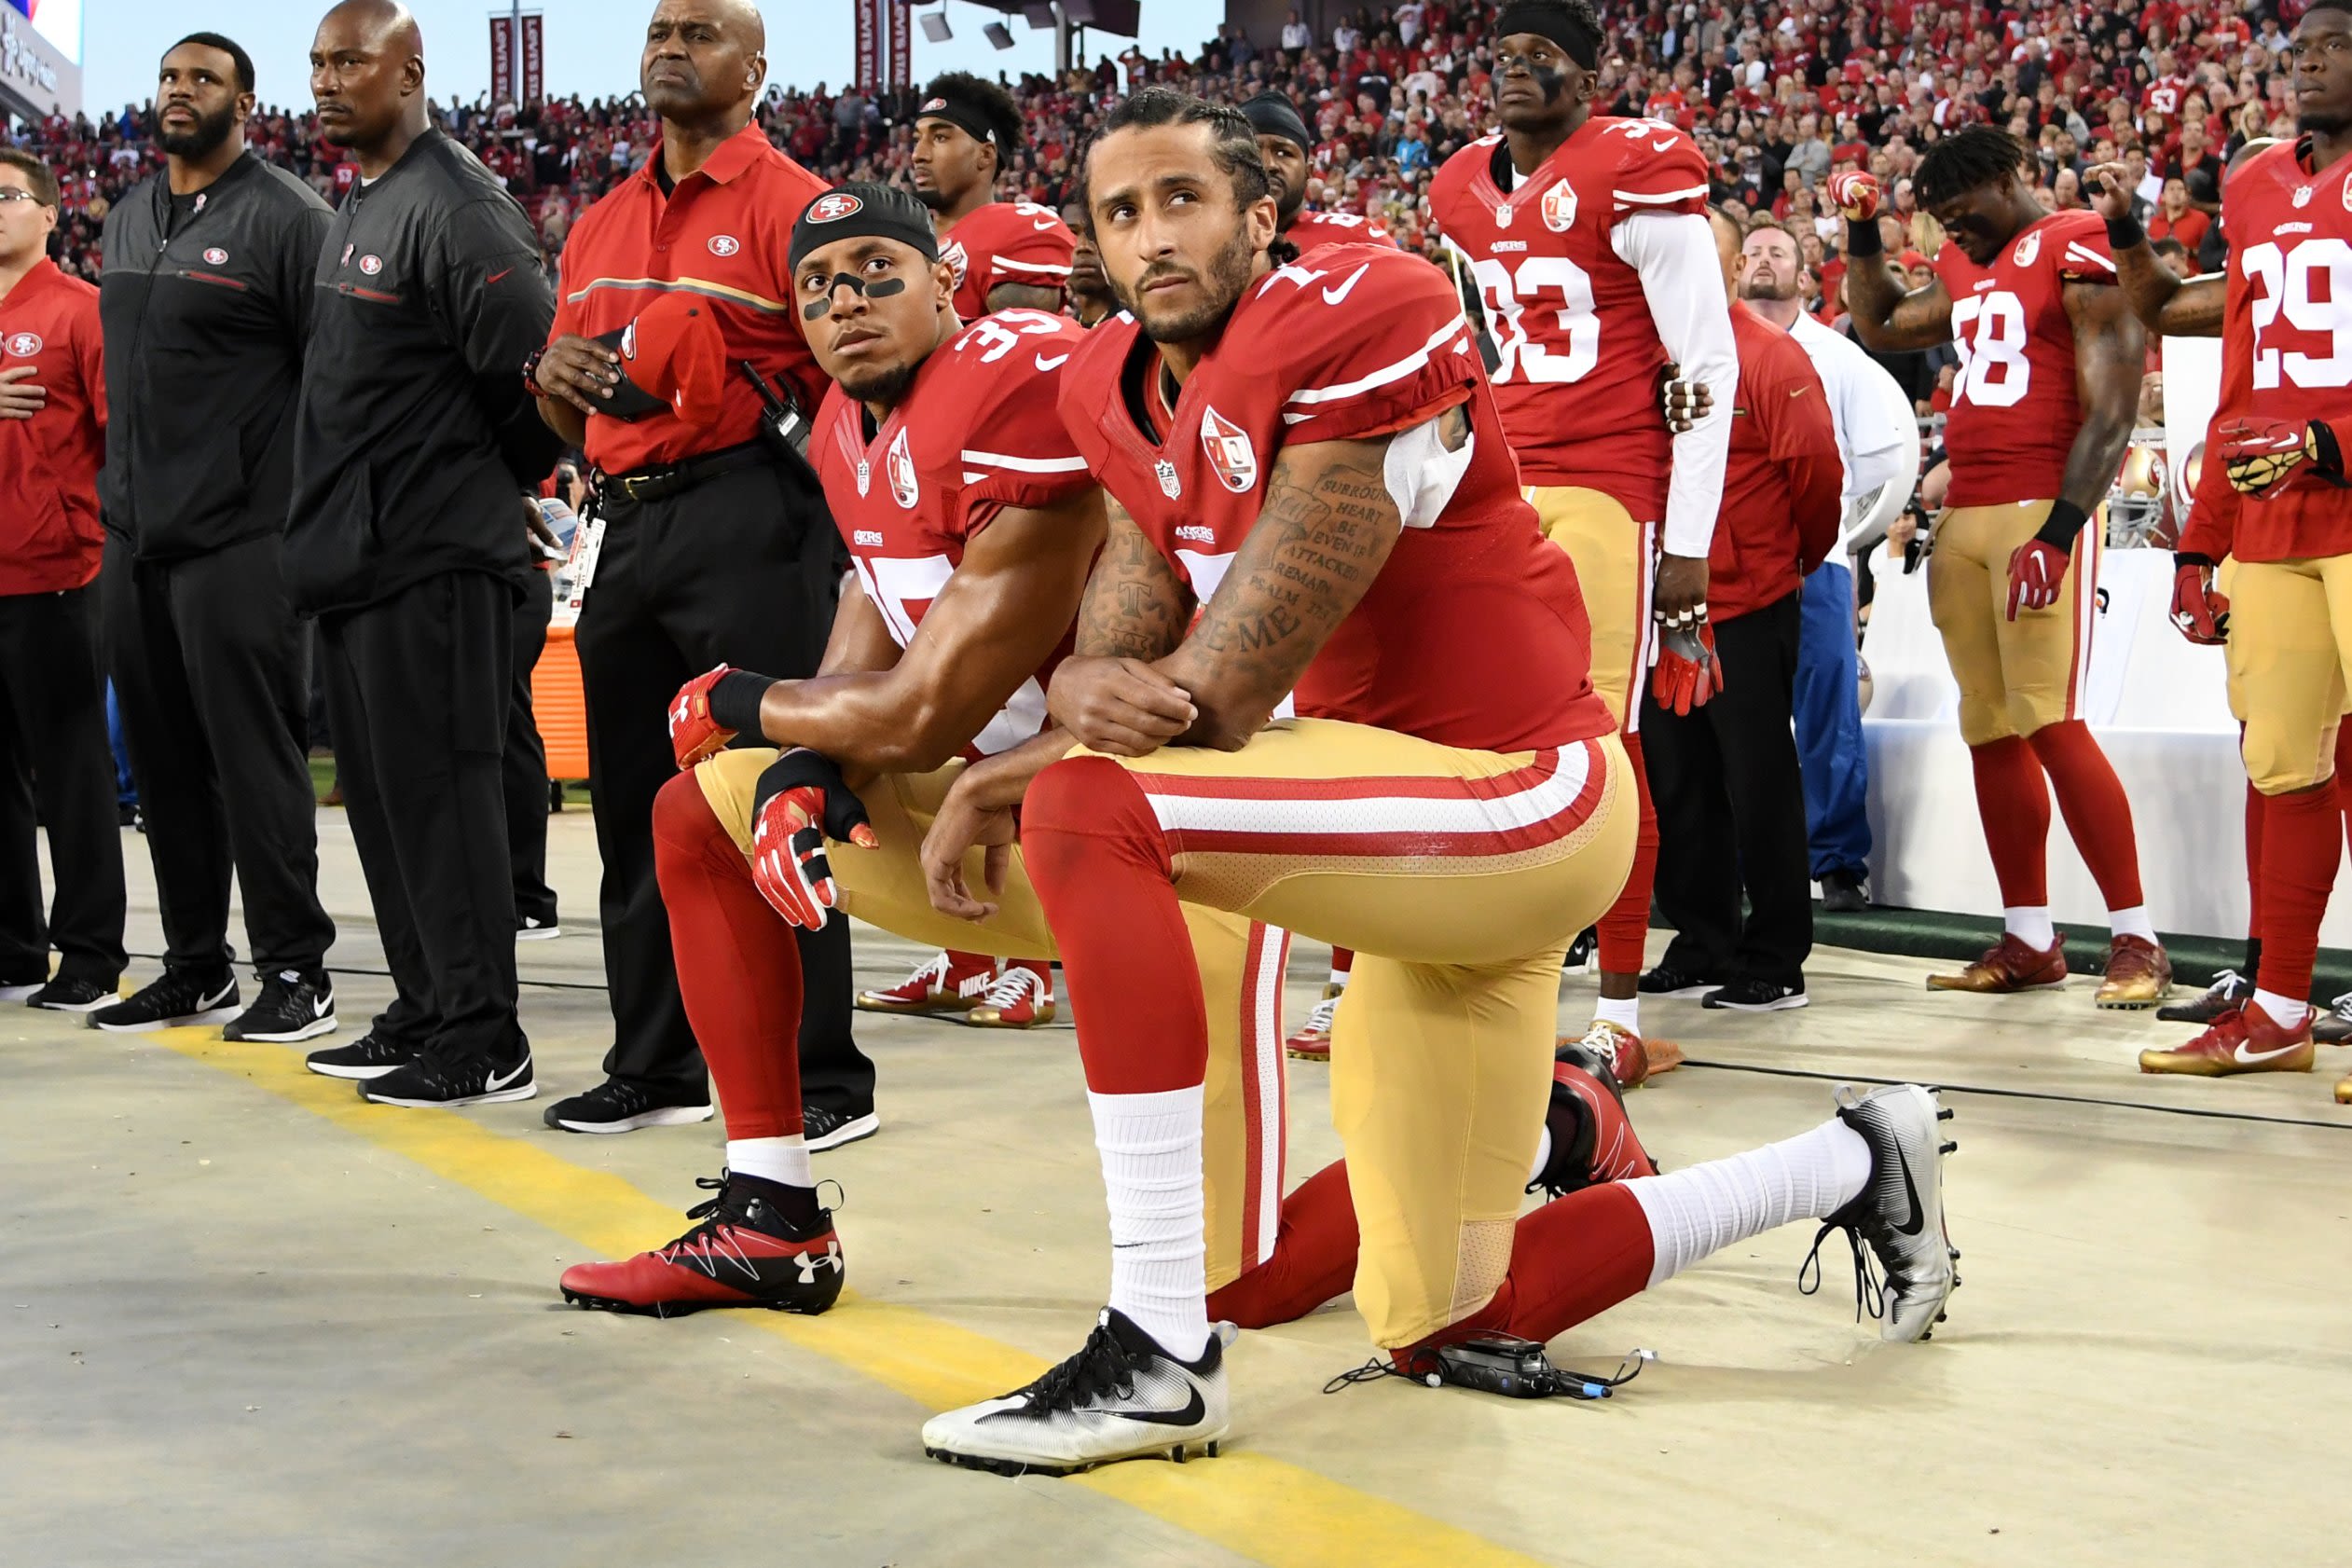 Hobart Sentimental oscuro National Anthem protests took Colin Kaepernick from star QB to unemployment  to a bold Nike ad | CNN